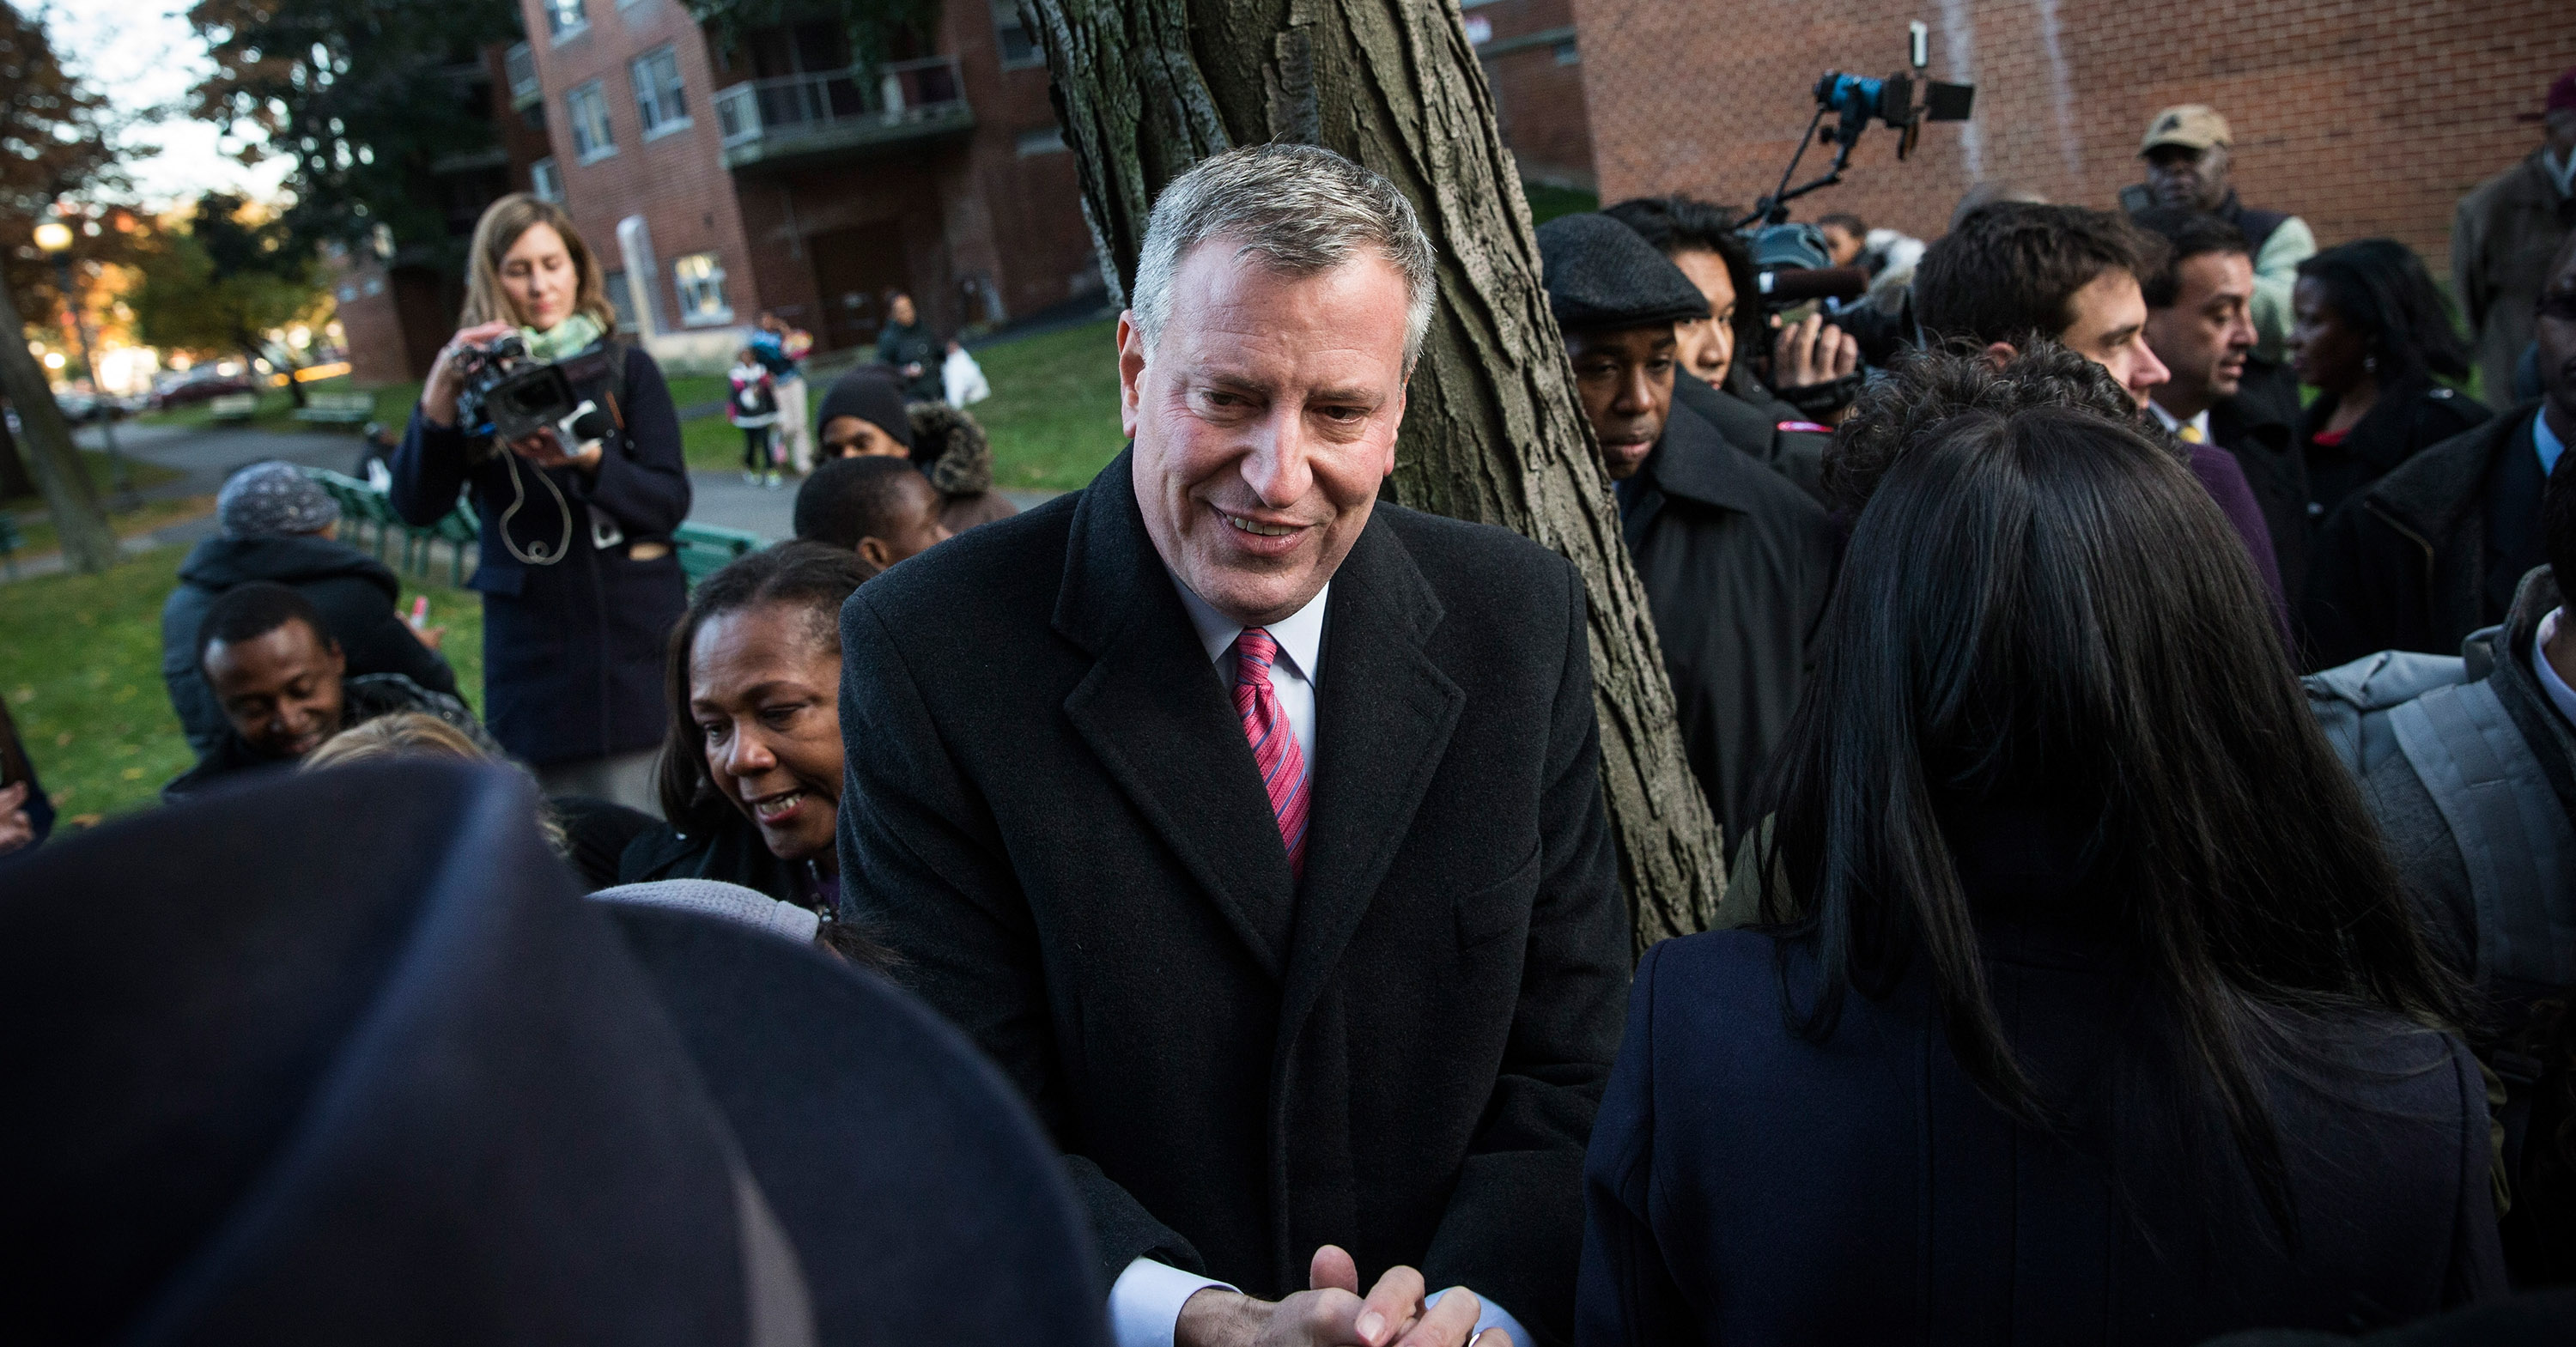 NYC Mayoral Candidate Bill De Blasio Campaigns One Day Before Election